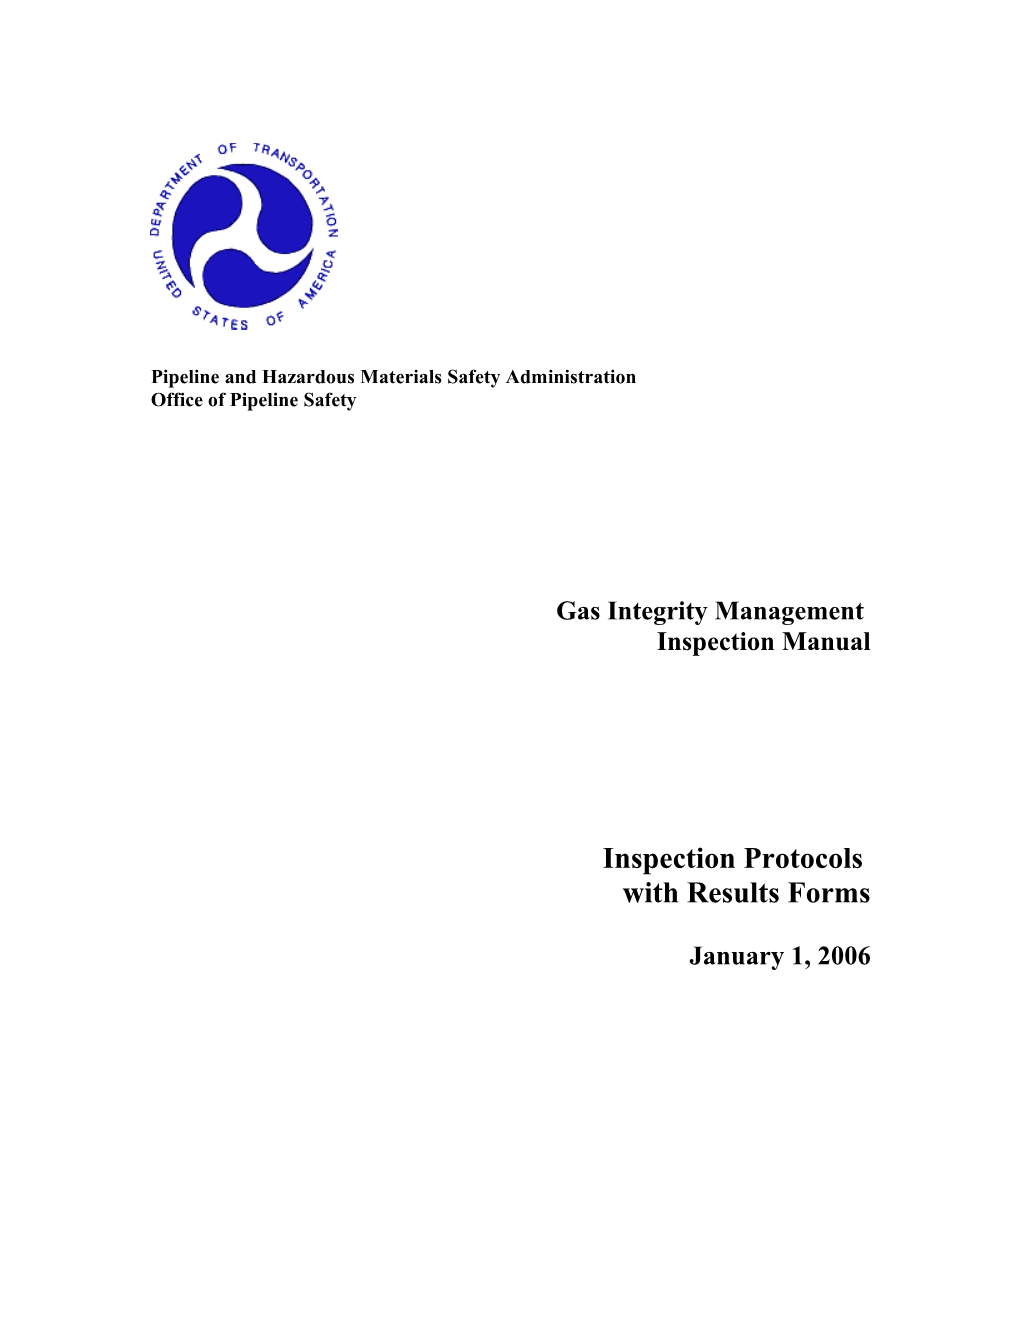 OPS Gas Integrity Management Protocol Results Form